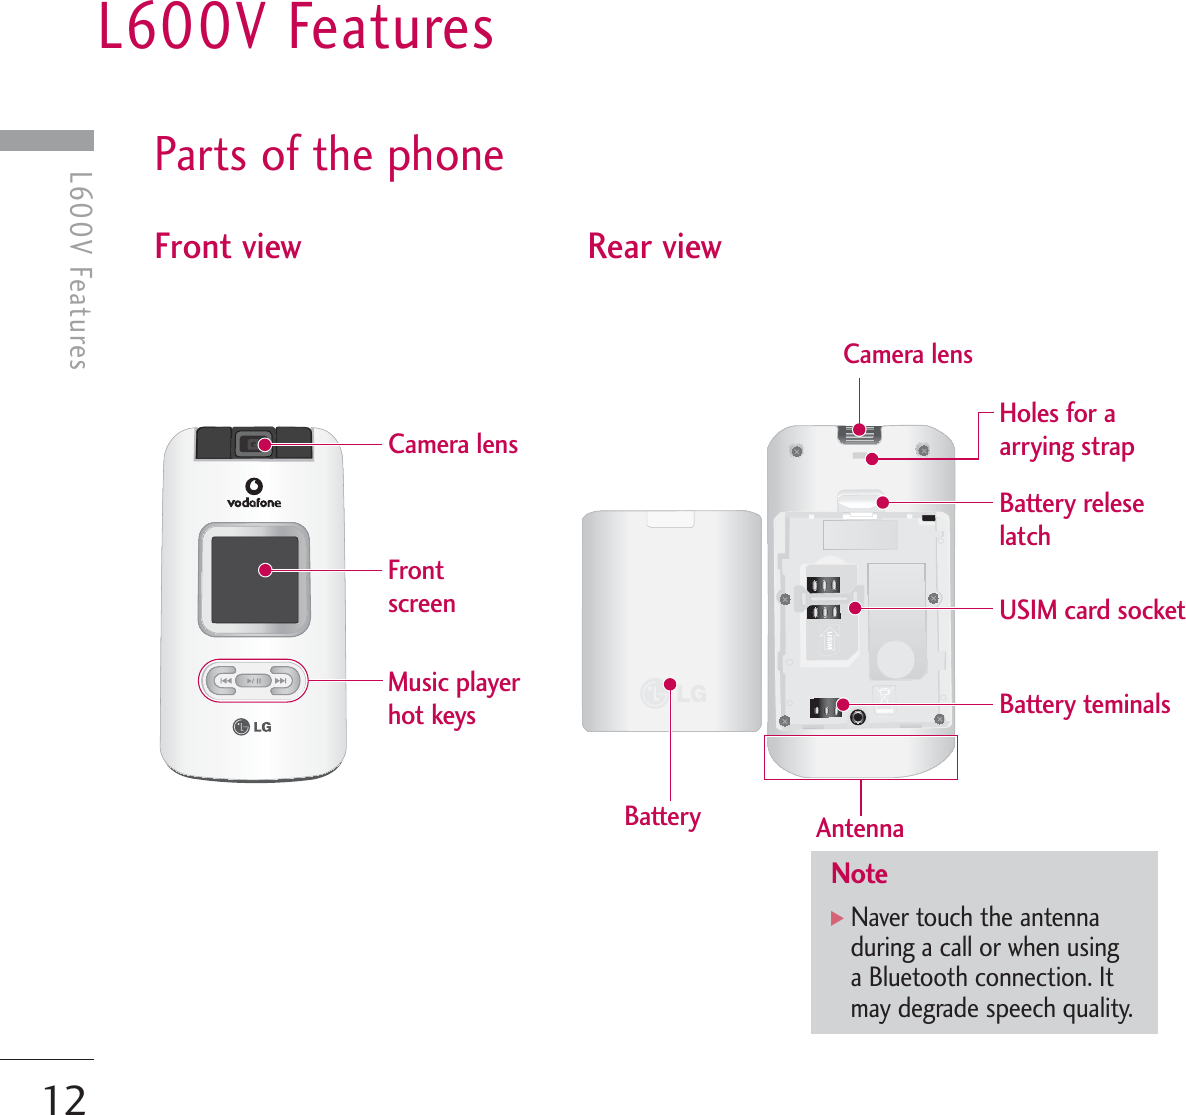 L600V Features12L600V FeaturesParts of the phoneFront view Rear viewCamera lensFront screenMusic playerhot keysBatteryBattery teminalsAntennaUSIM card socketBattery releselatchHoles for a arrying strapCamera lensNote]Naver touch the antennaduring a call or when usinga Bluetooth connection. Itmay degrade speech quality.